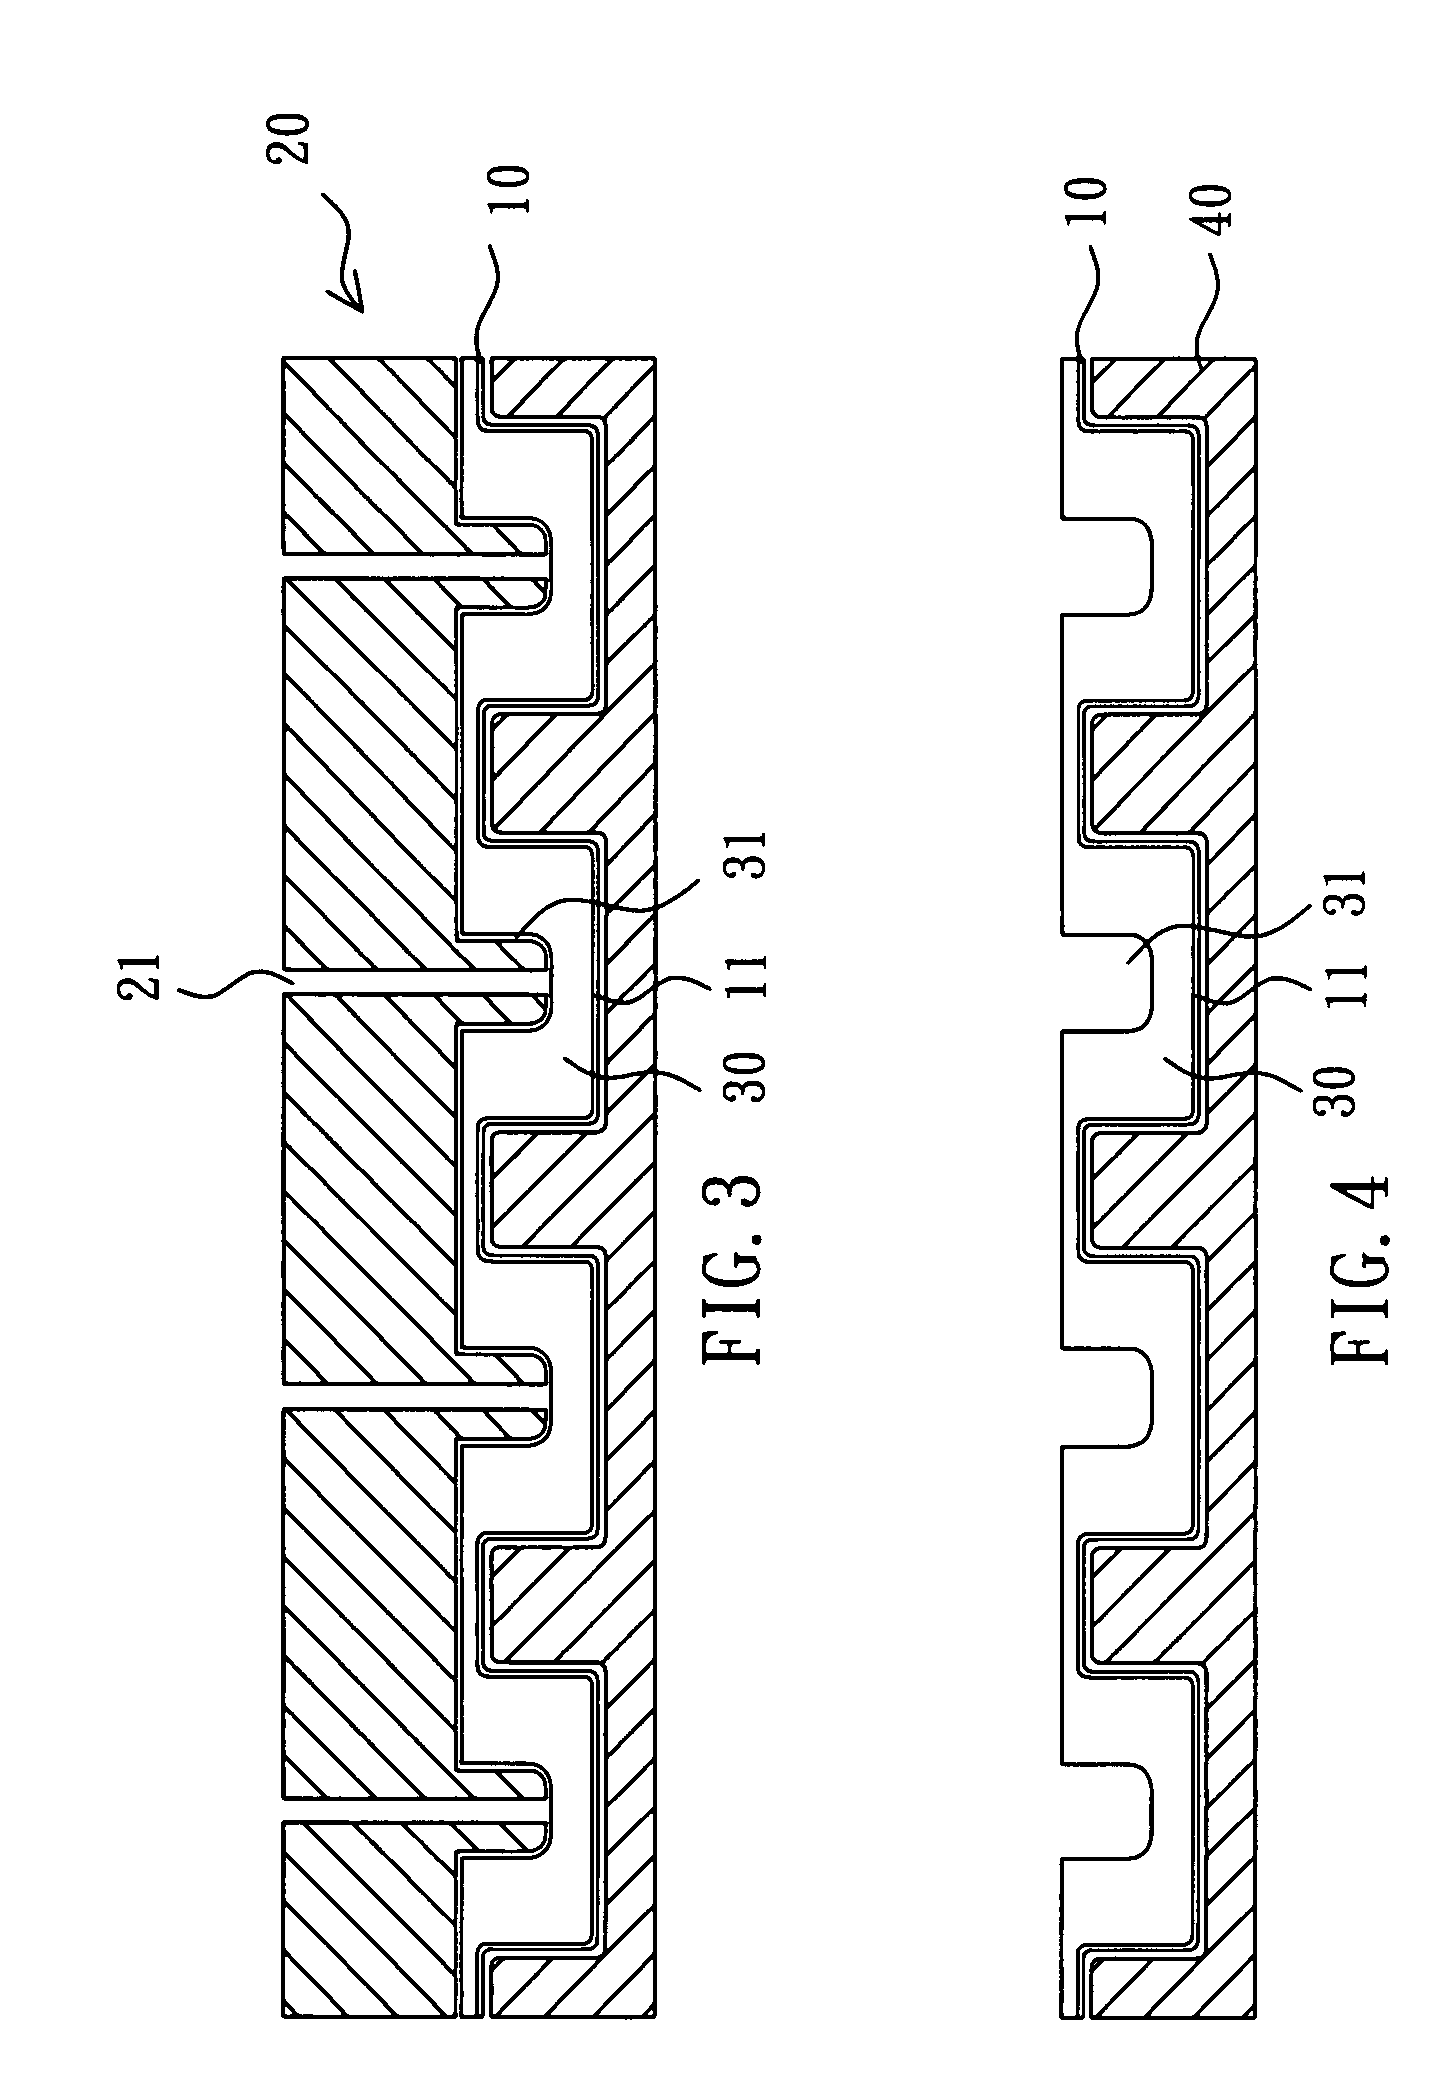 Method for manufacturing a keyboard